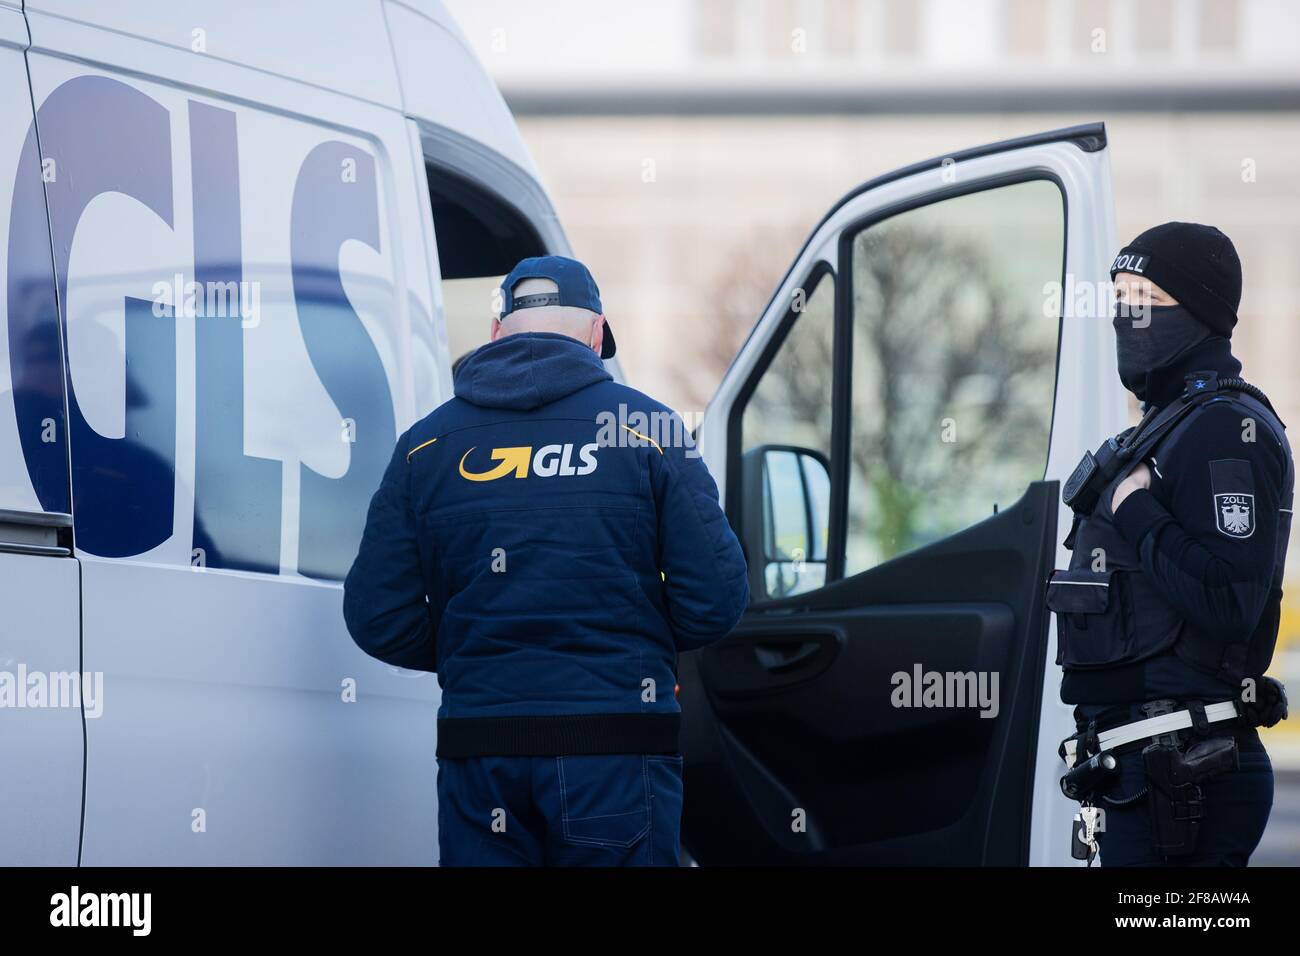 Bornheim, Germany. 13th Apr, 2021. A customs officer checks a GLS delivery  vehicle. Customs and police inspected parcel delivery drivers. They checked  whether drivers were employed via subcontractor chains below the legal